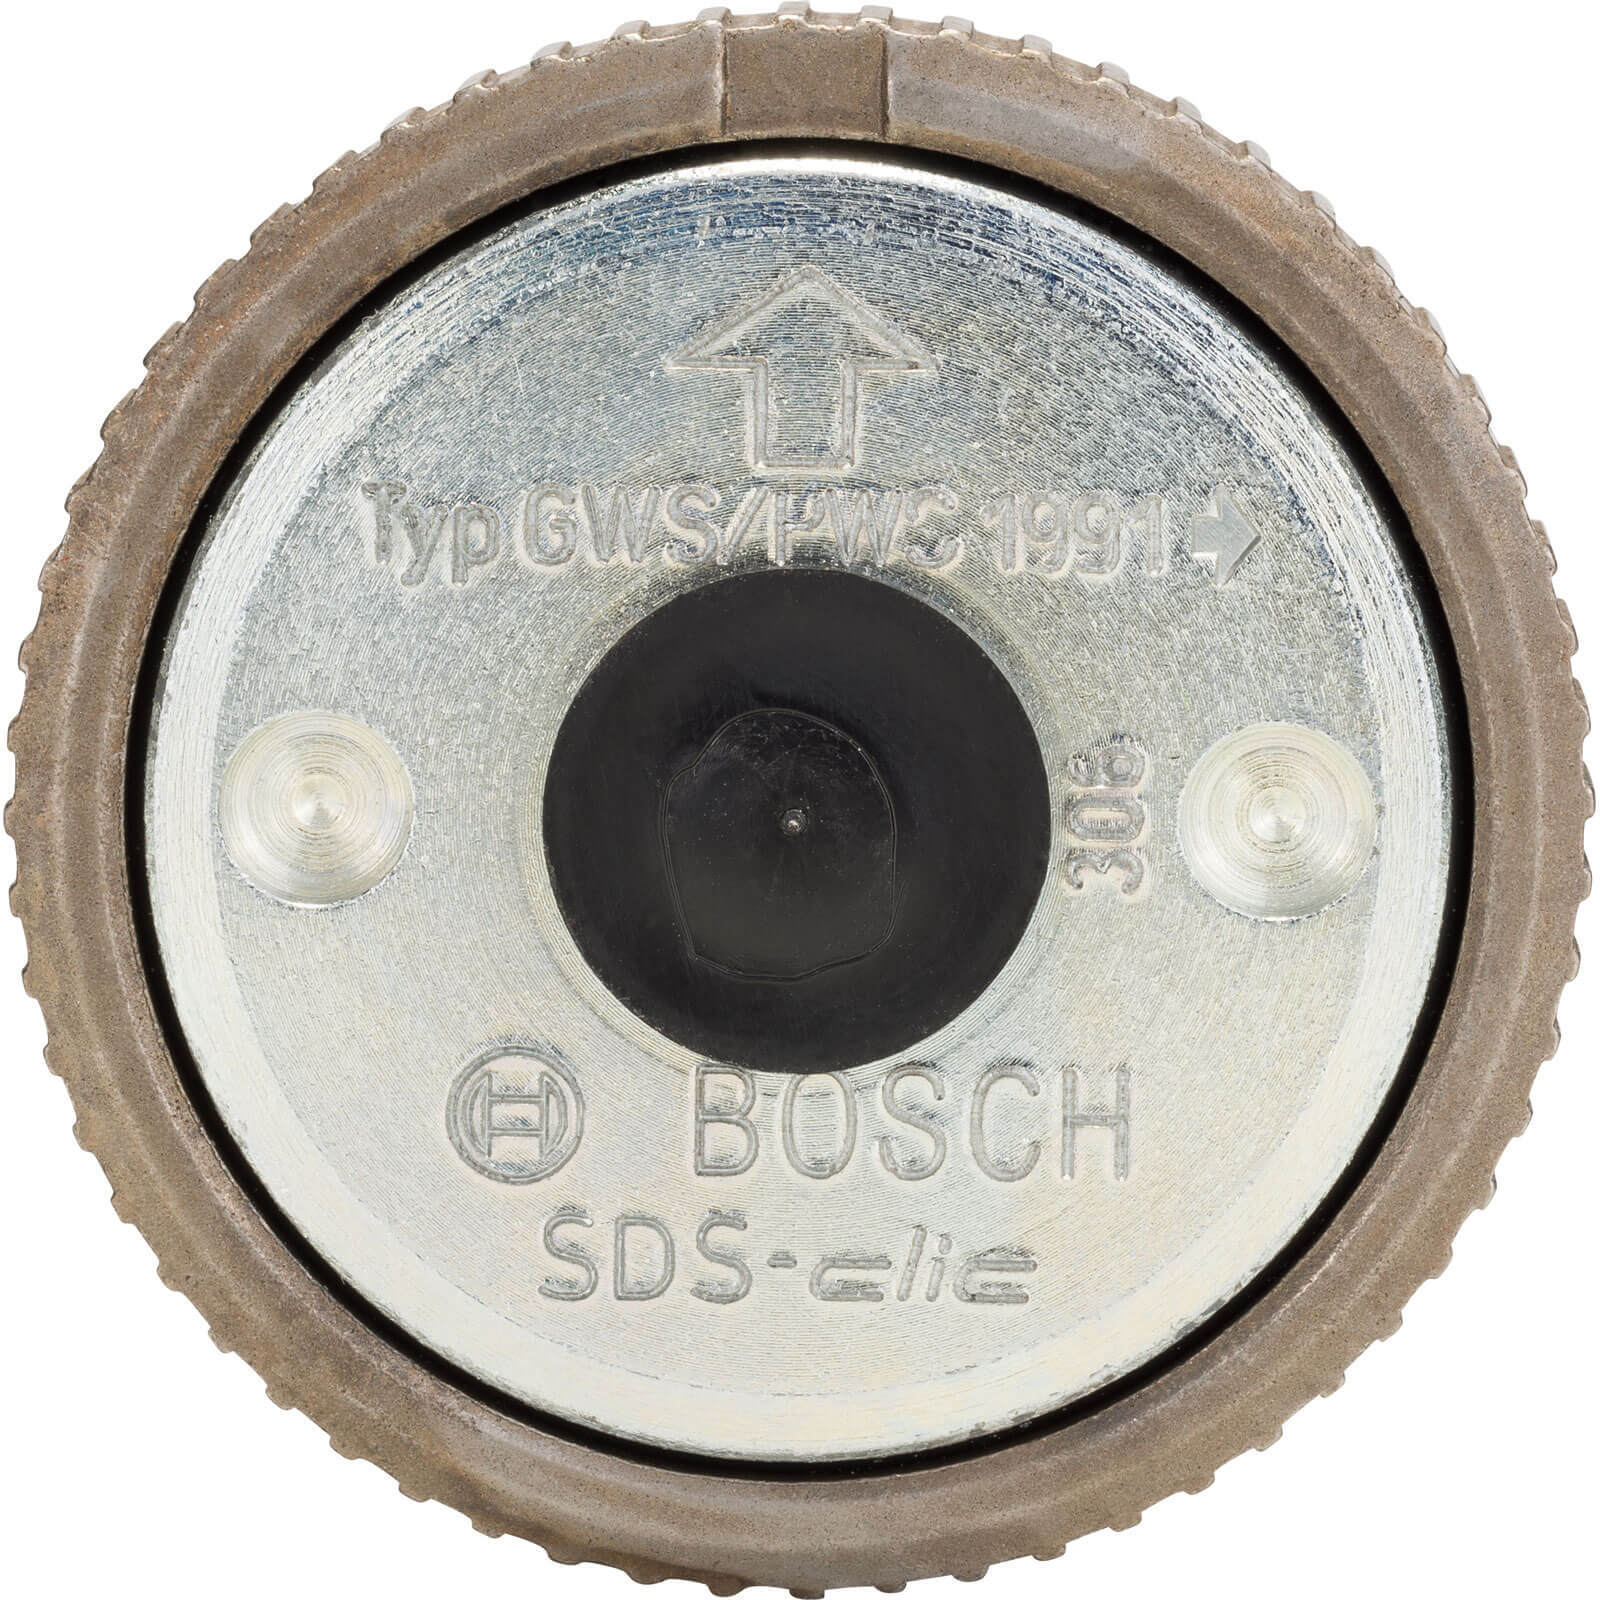 Image of Bosch SDS Clic Quick Change Flange Locking Nut For Angle Grinders